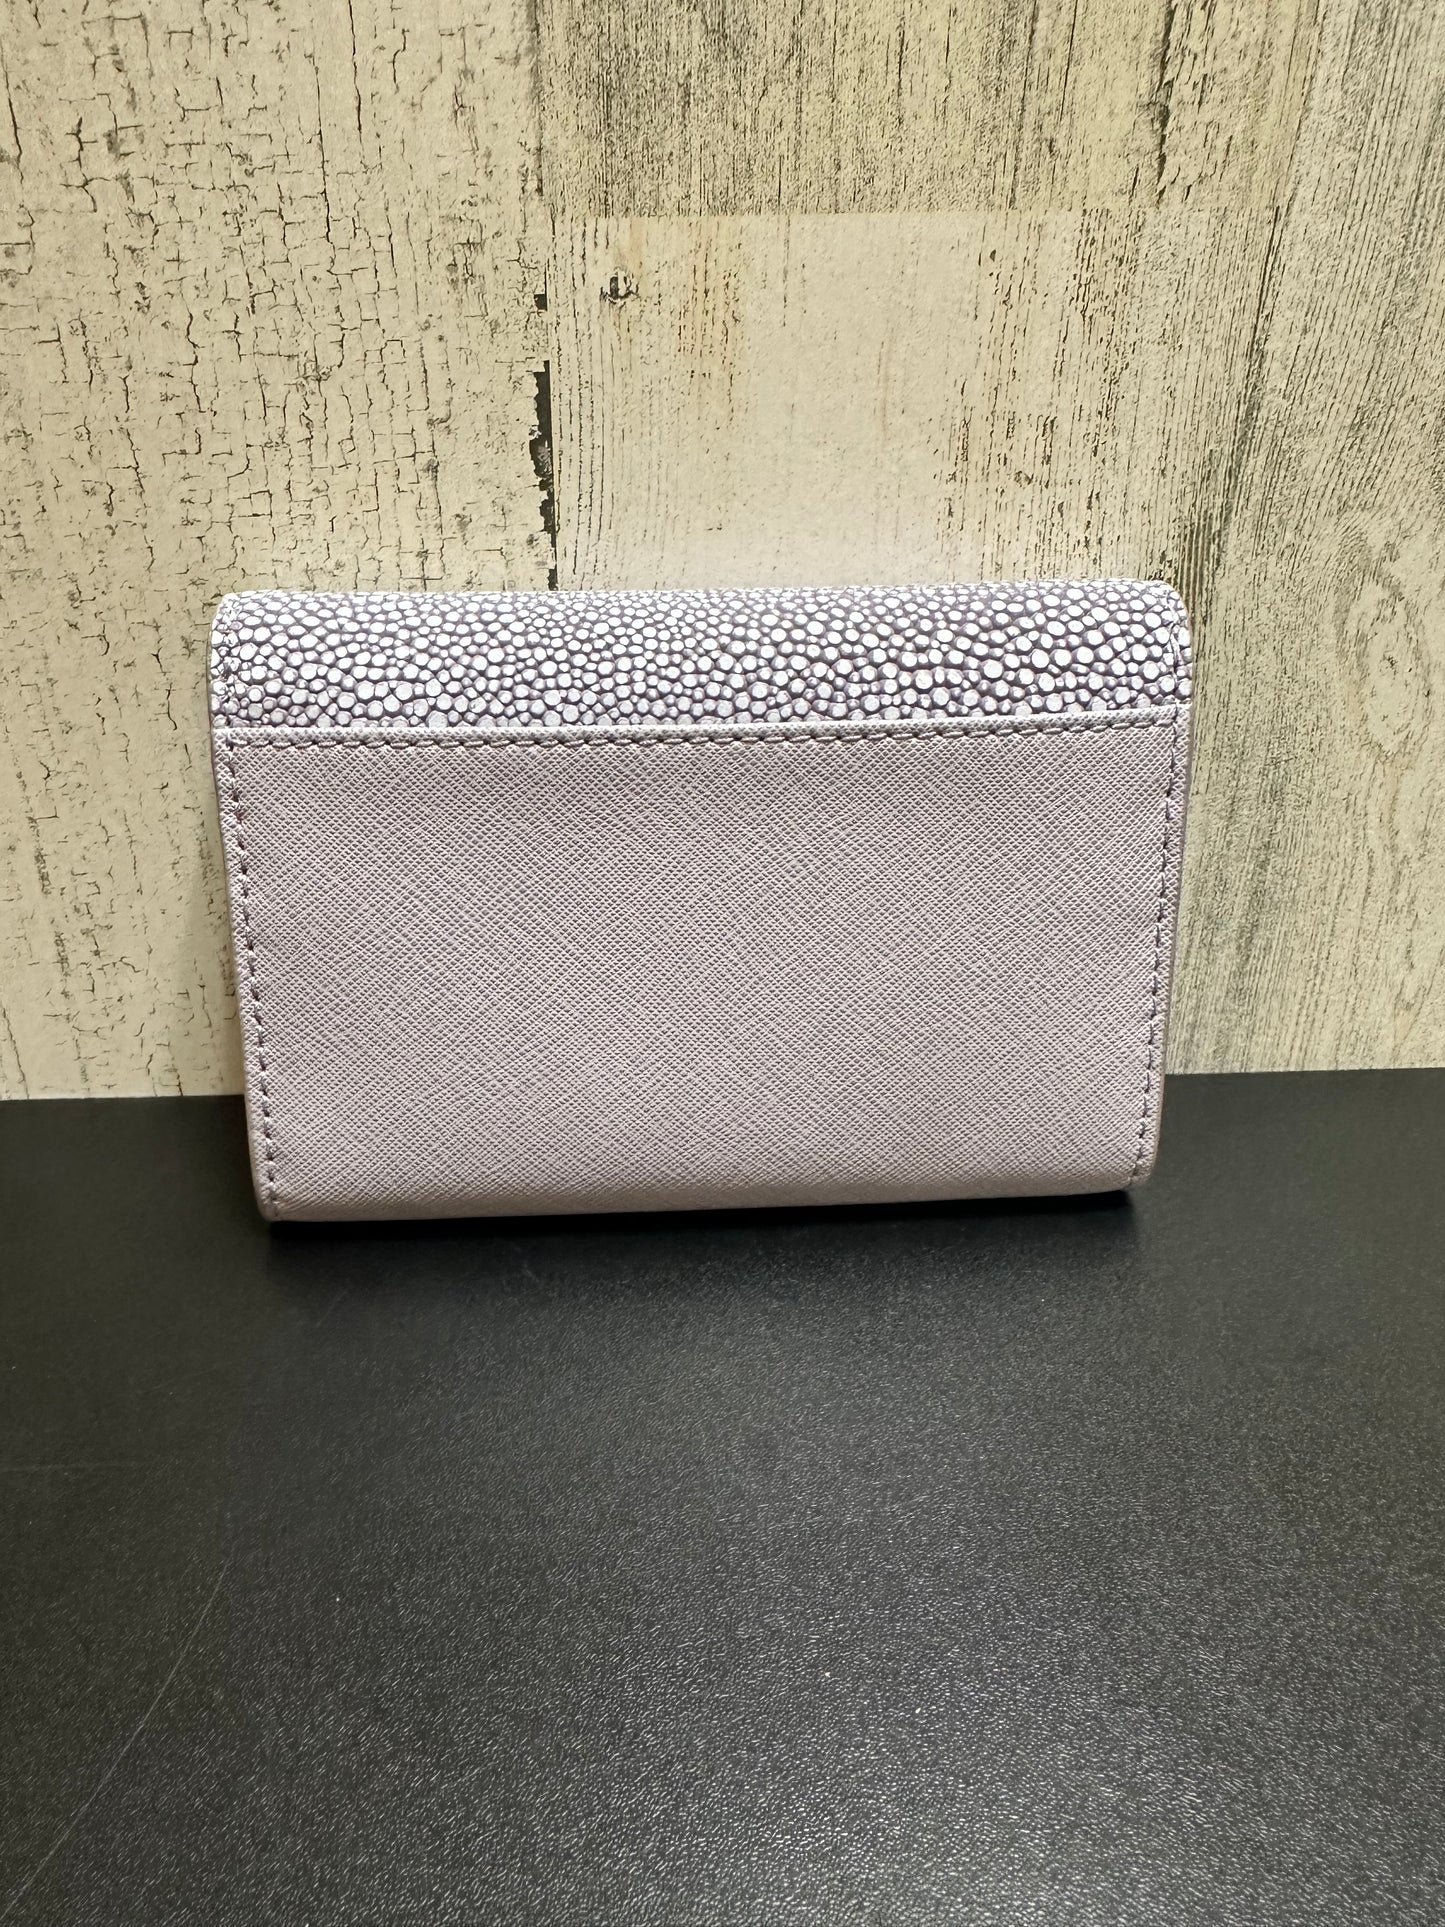 Wallet By Michael Kors  Size: Small